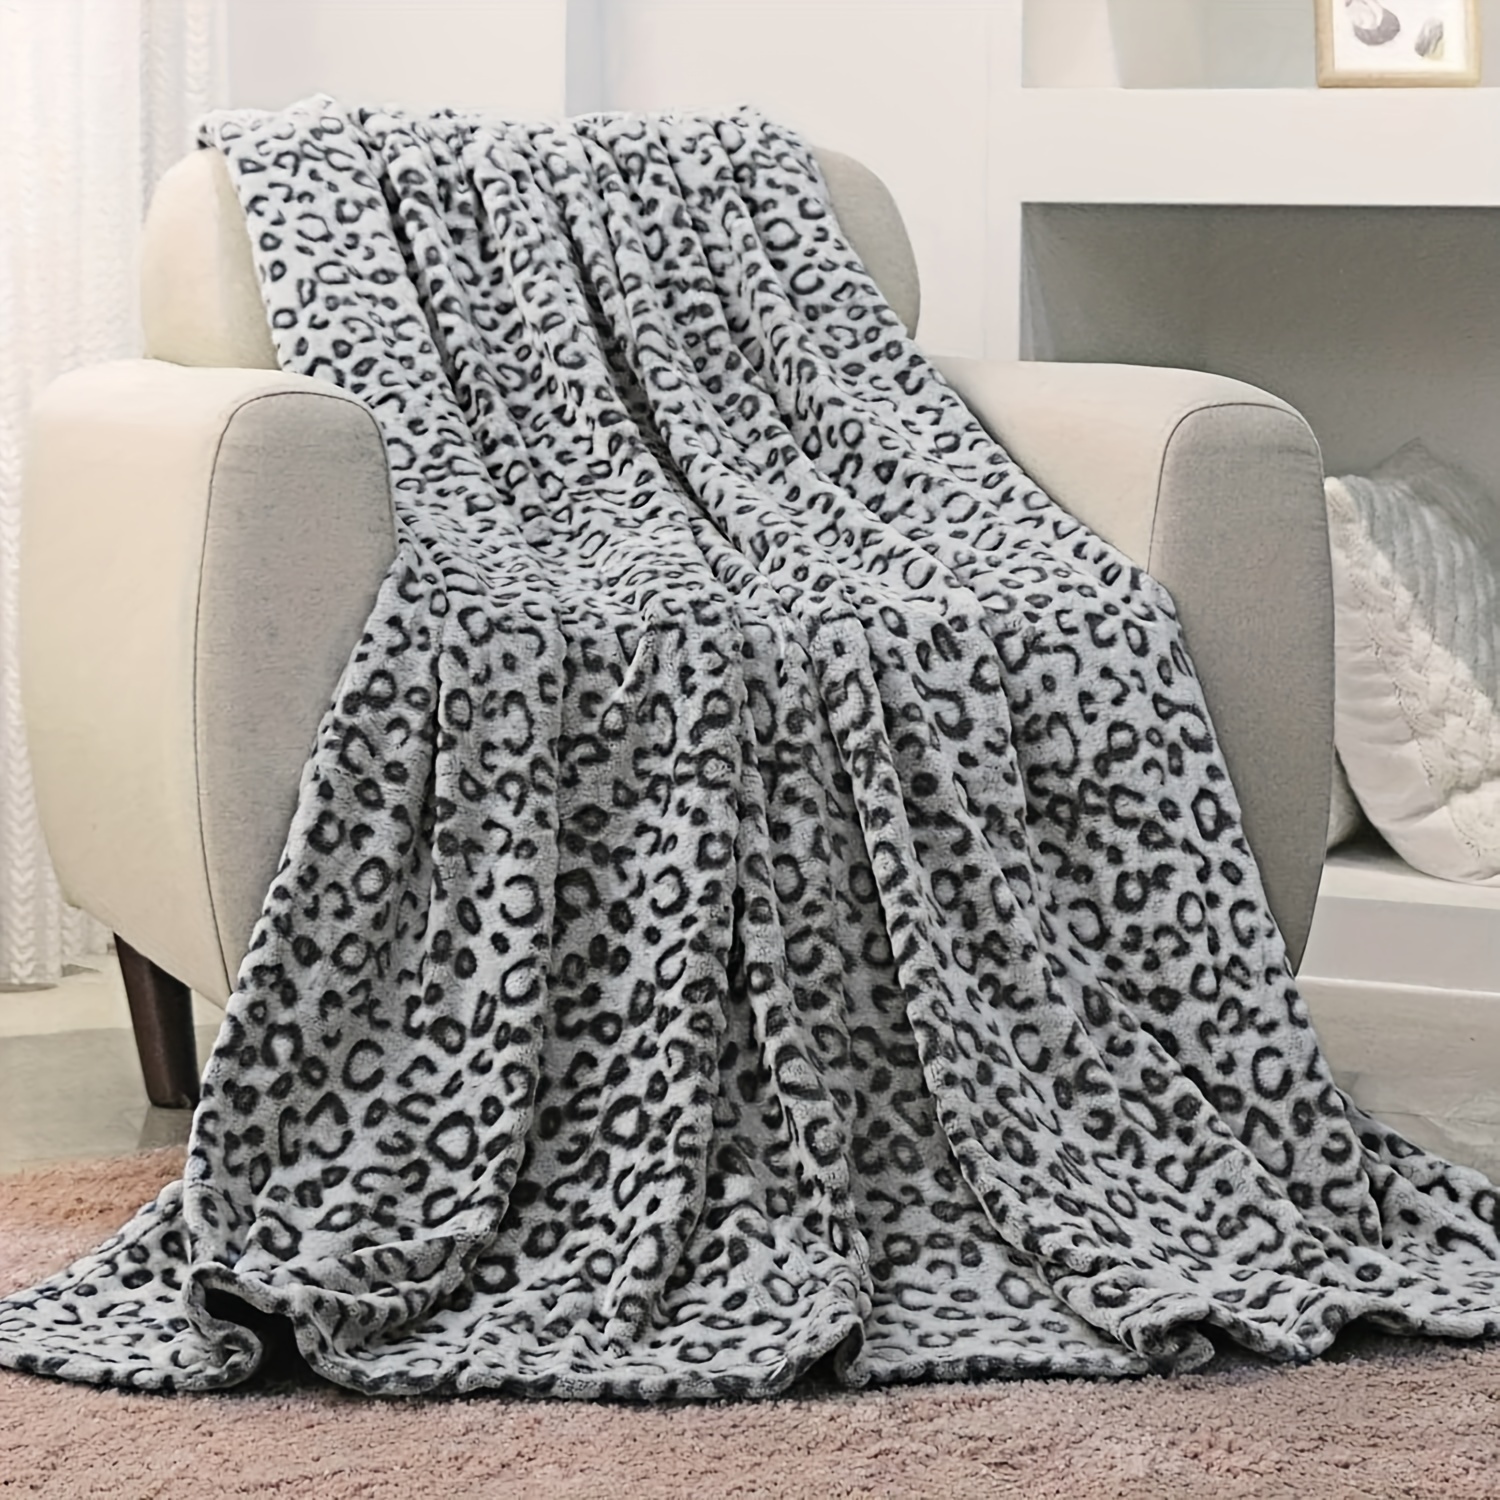 

1pc Flannel 3d Leopard Print Blanket Extra Soft Lightweight Fluffy Sofa Blanket Grey Available All Year Round